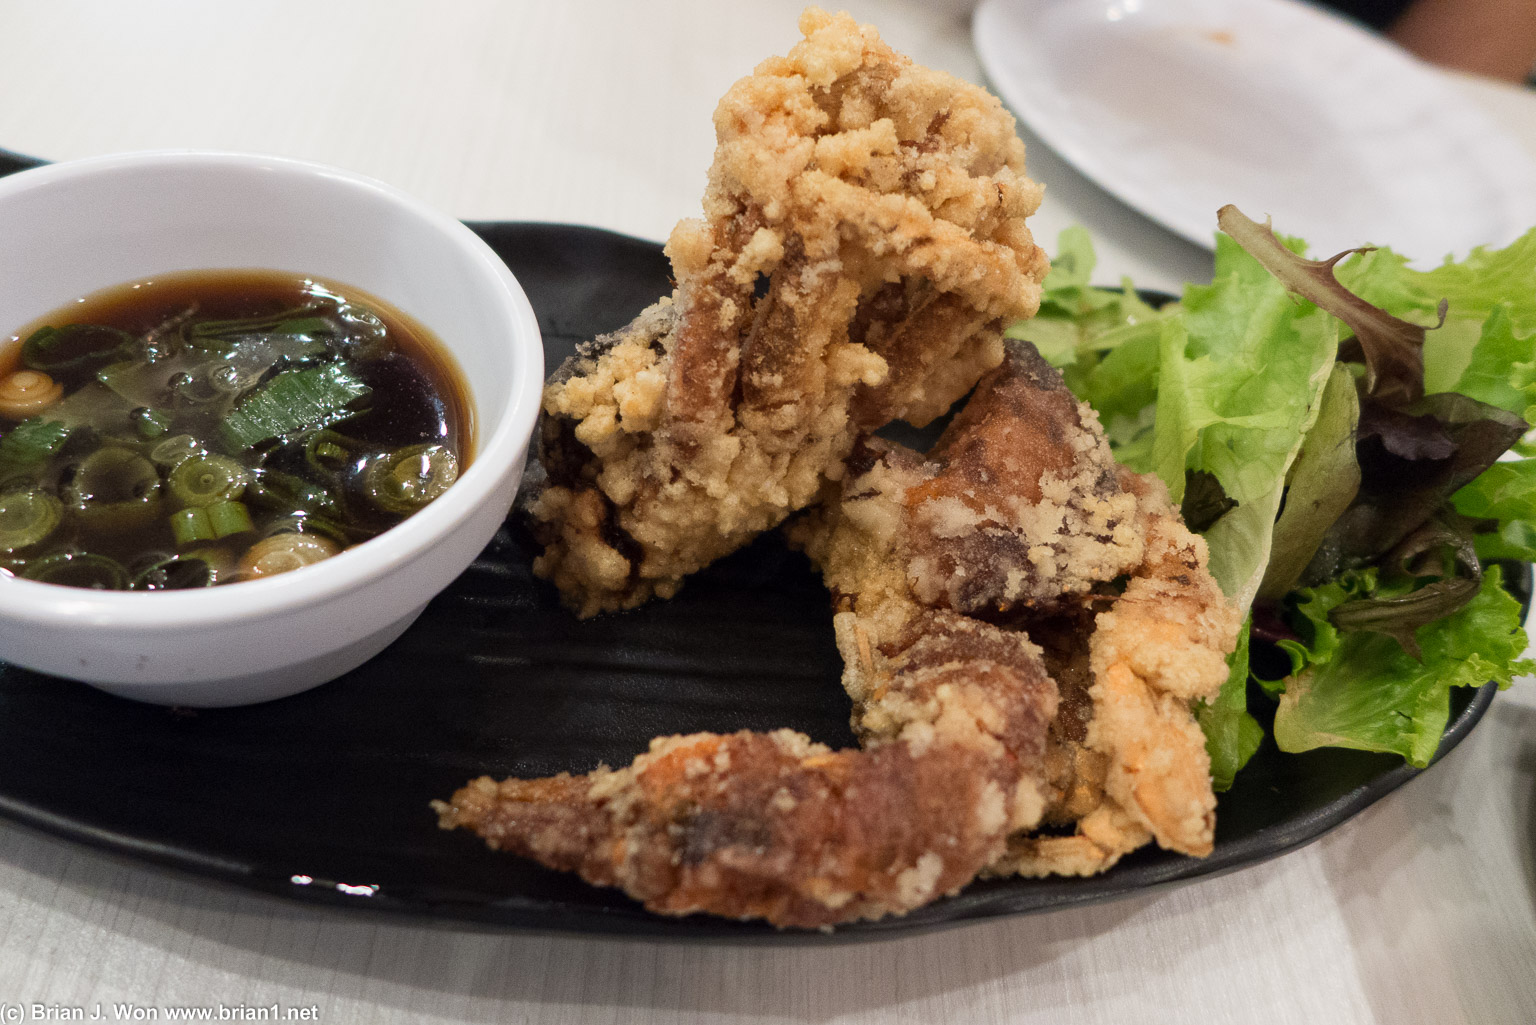 Soft shell crab. Pretty okay for $6, but the deep frying hides the fact that it's a $6 crab.